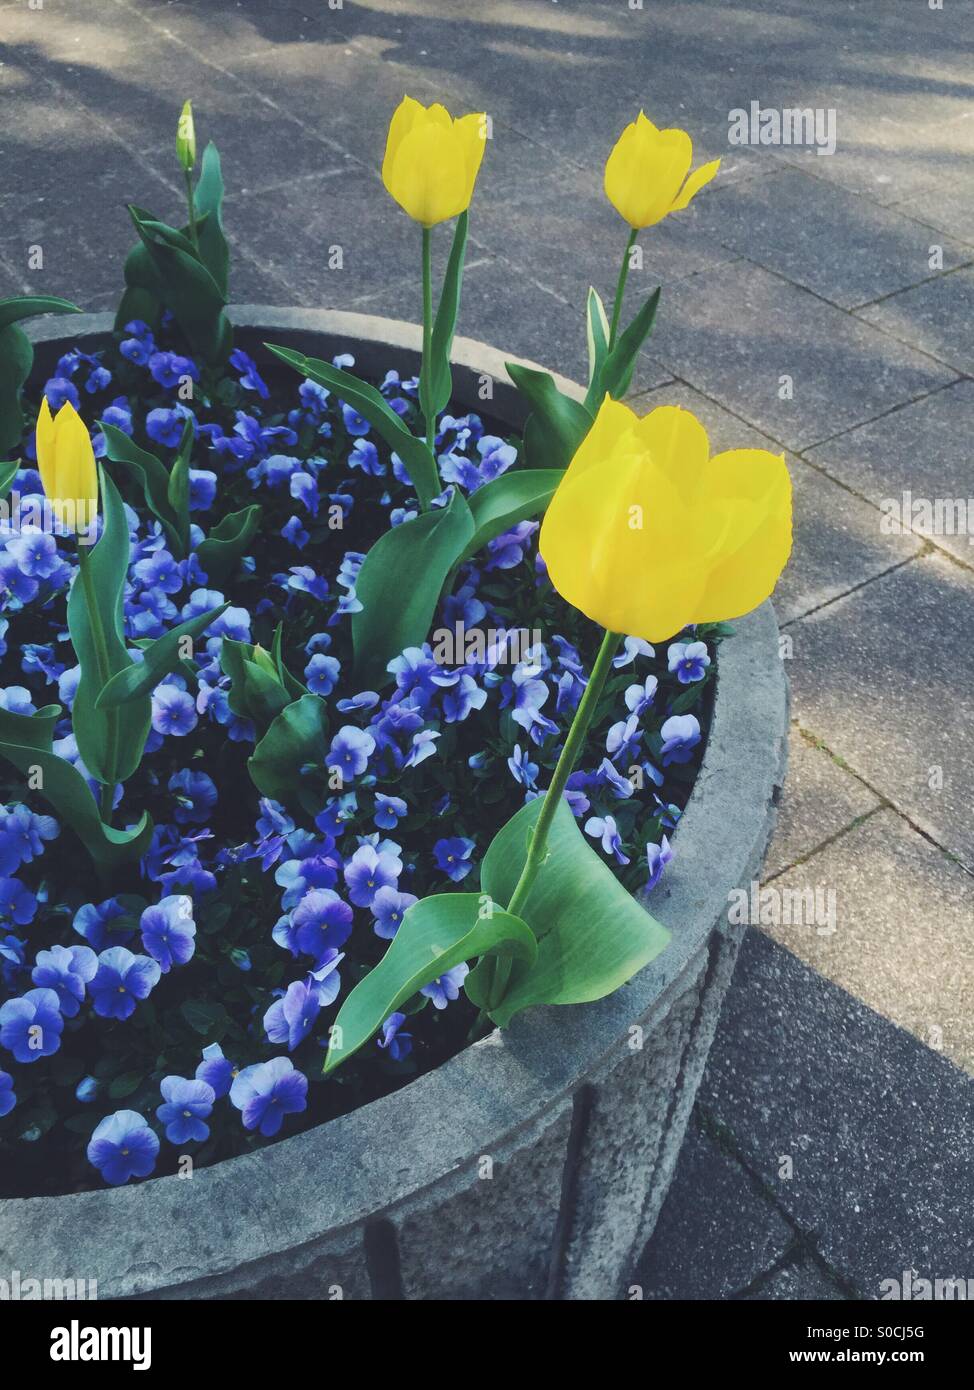 Large flower pot with pretty yellow tulips and violets in Spring. Stock Photo